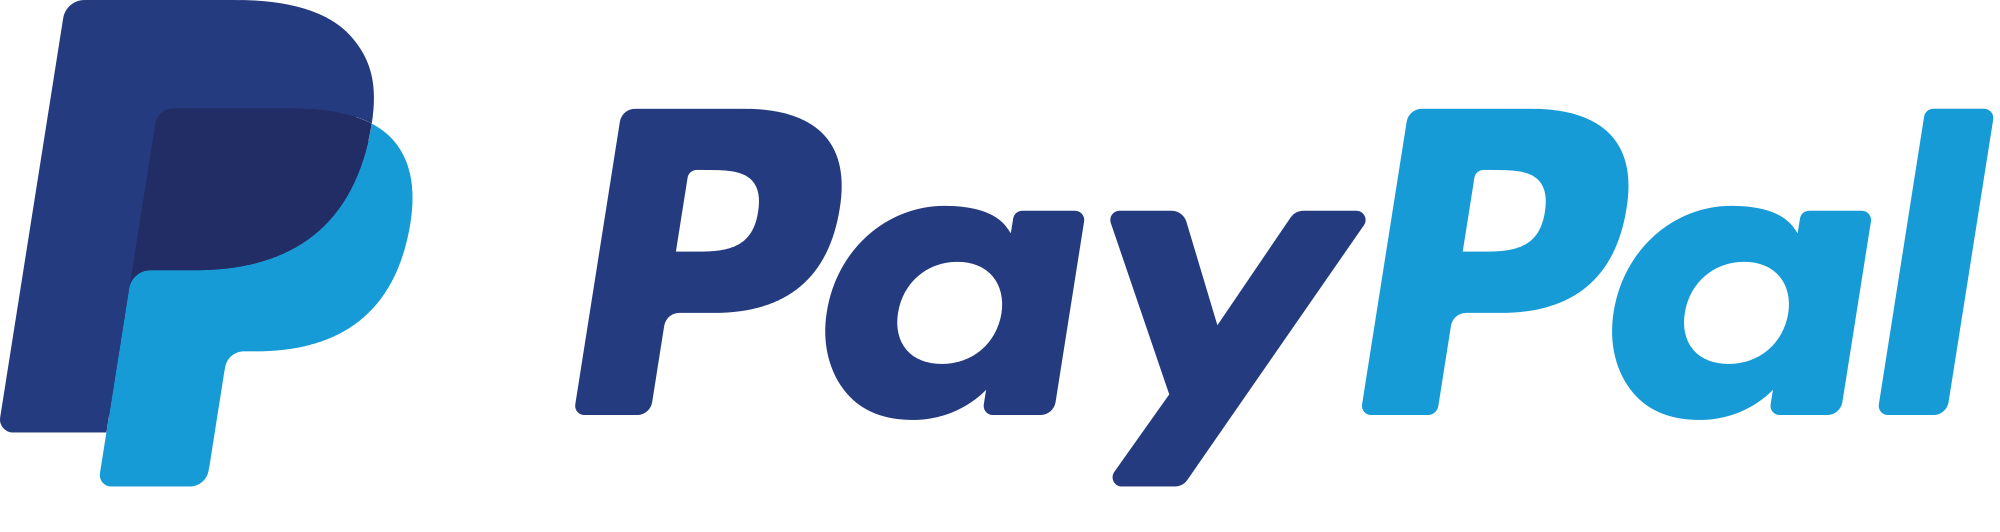 PayPal supporto 1 1